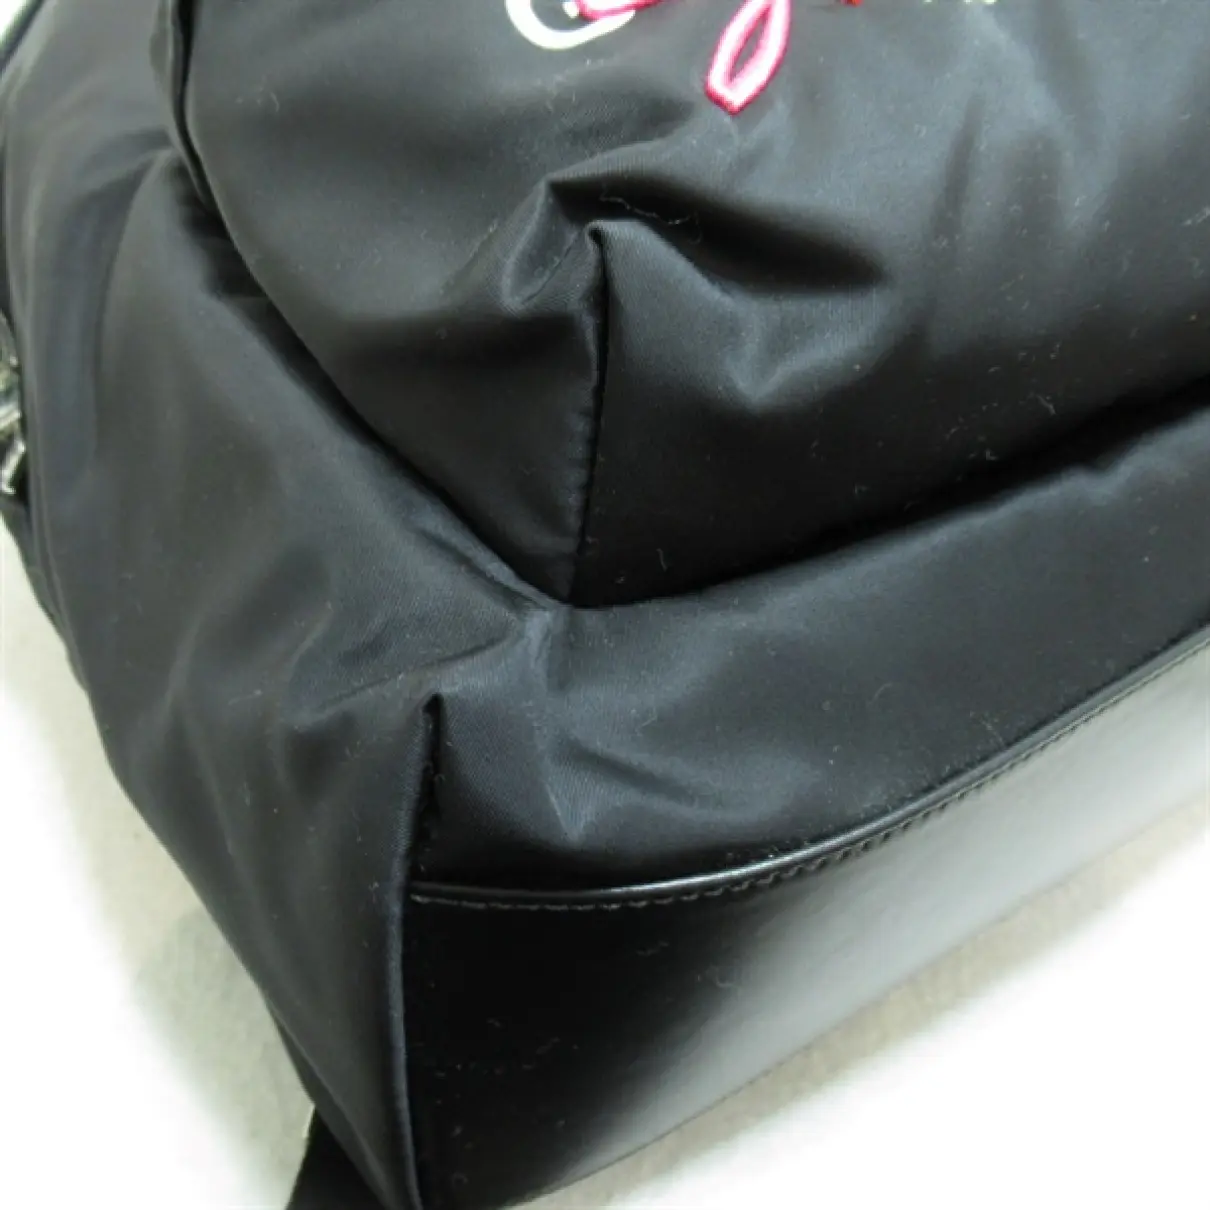 Cloth backpack Givenchy